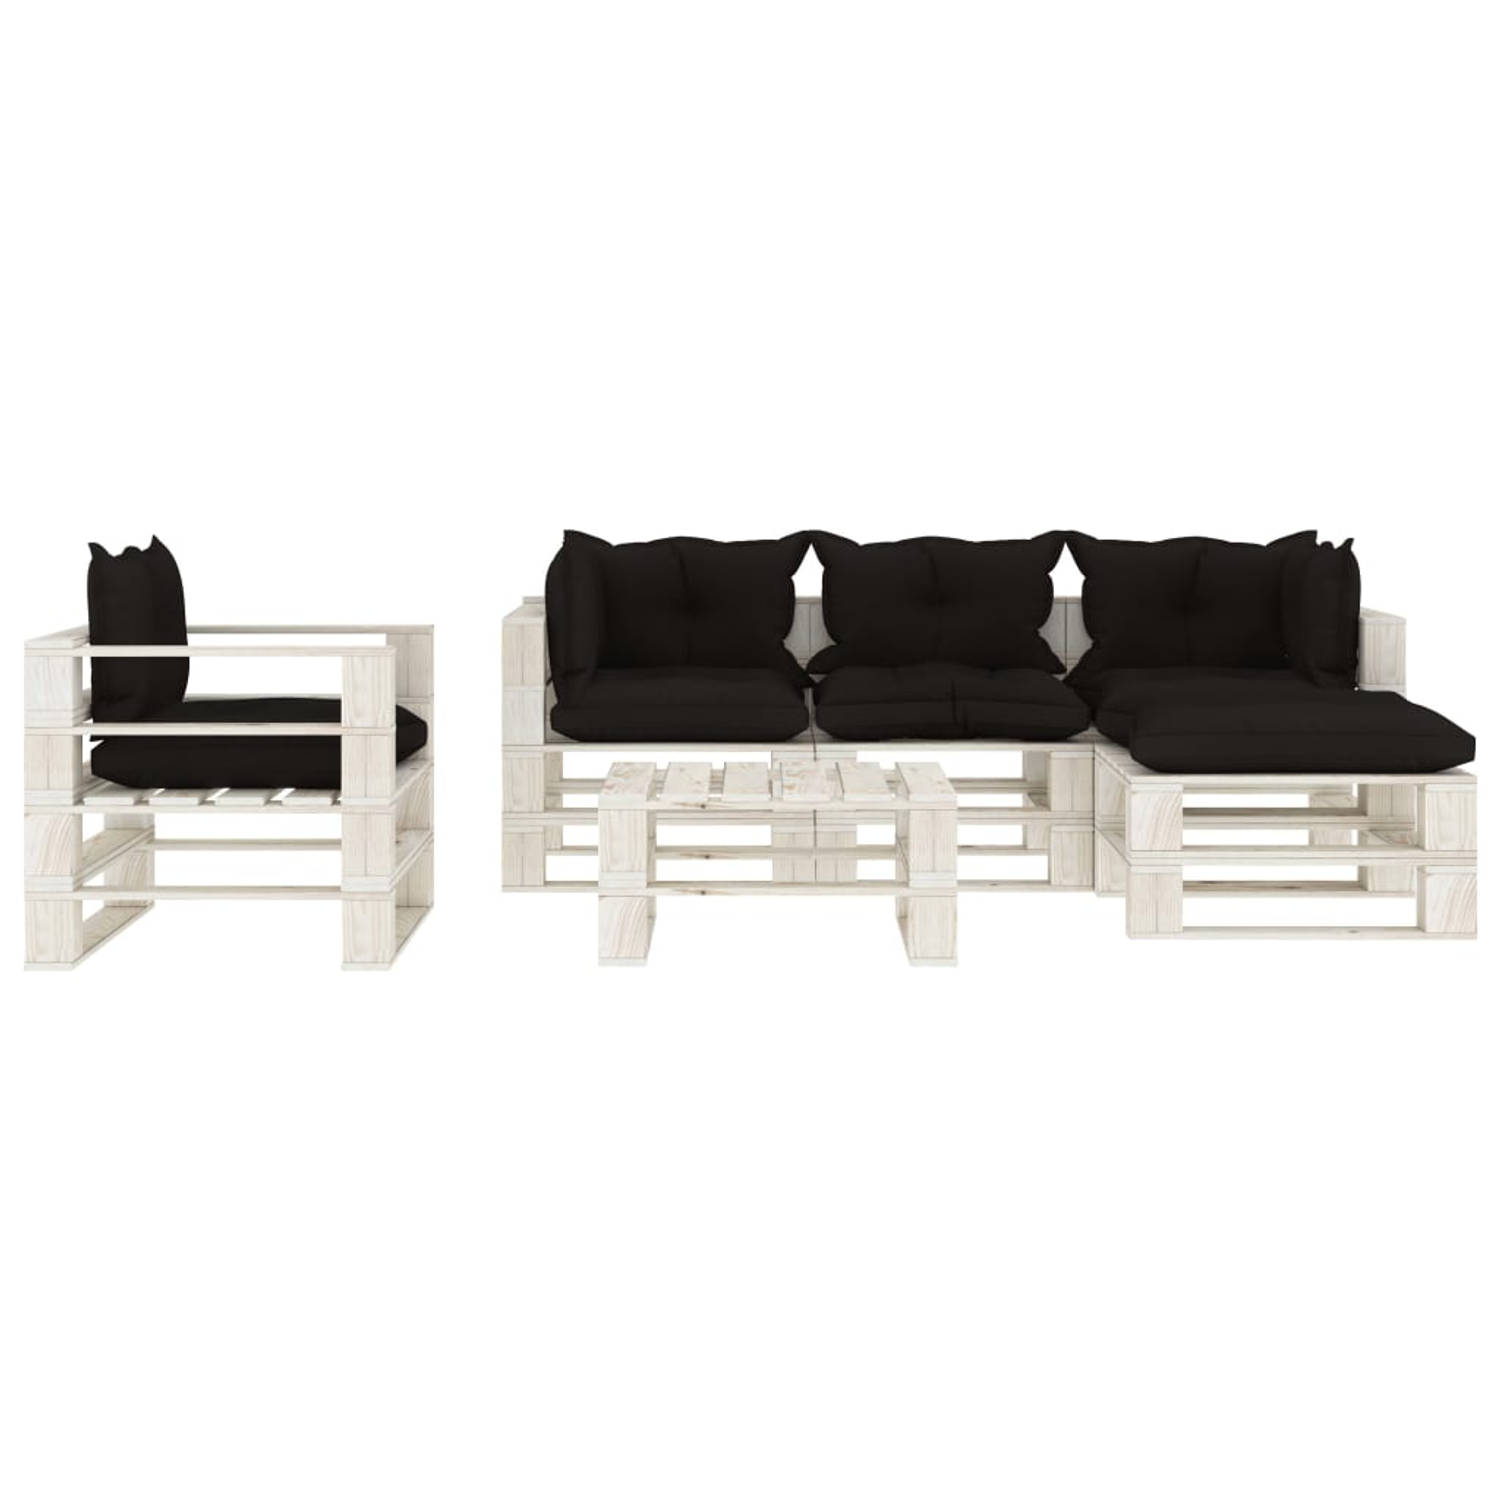 The Living Store - Loungeset - Pallet - 70x67.5x60.8 cm - Grenenhout